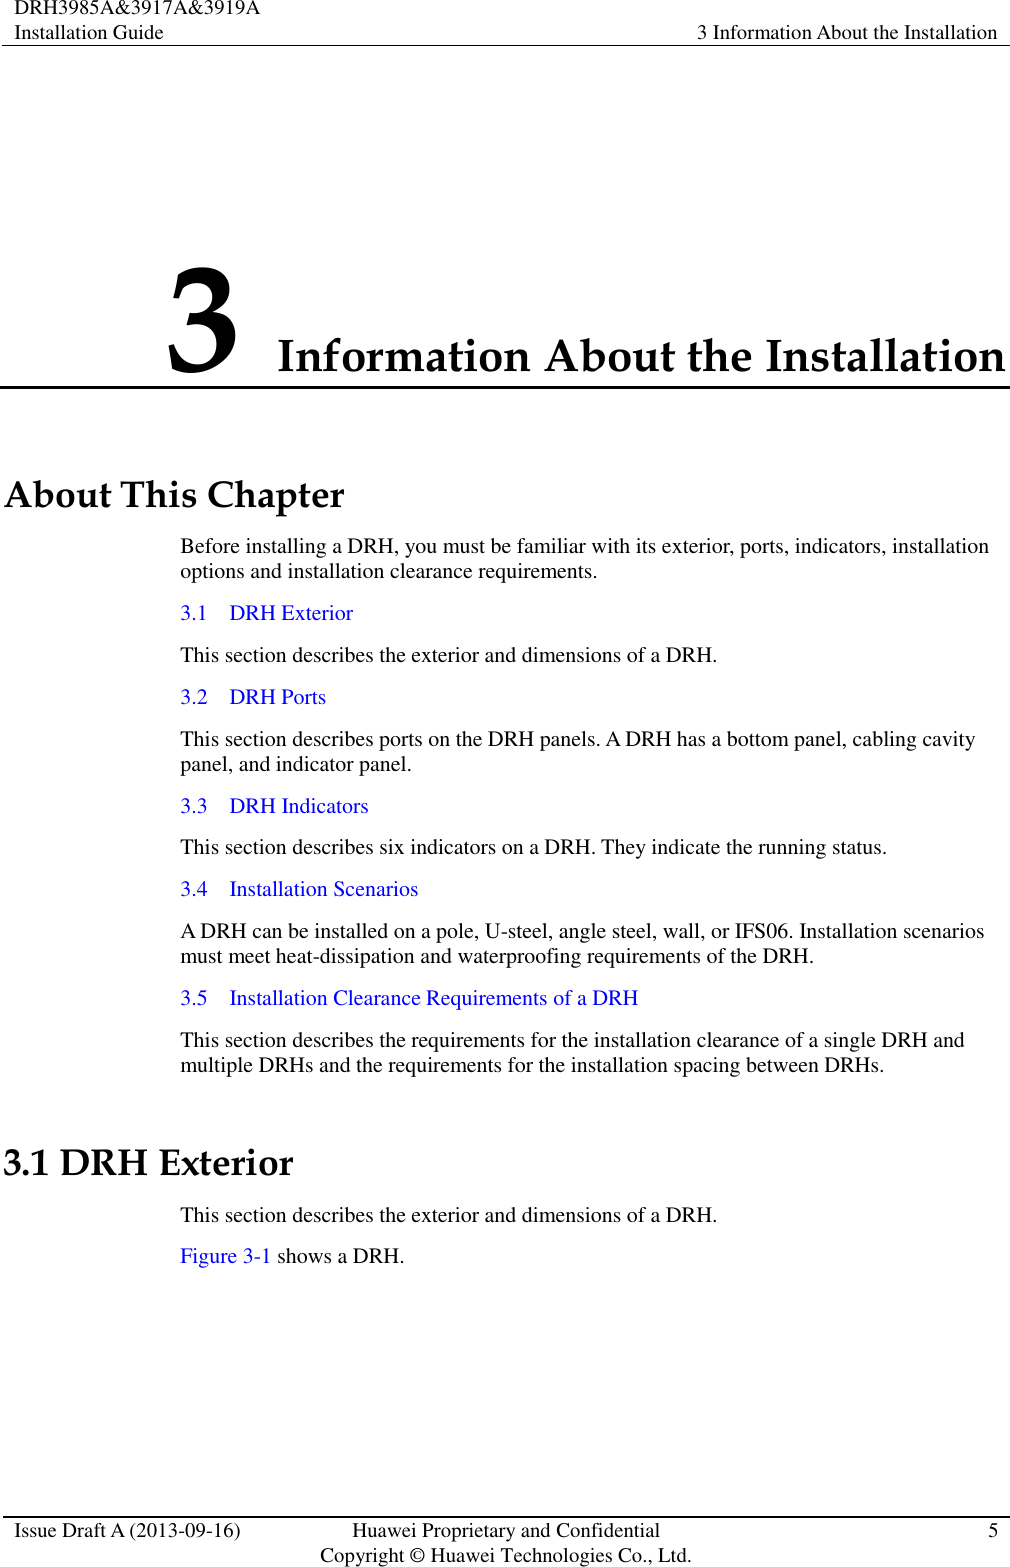 DRH3985A&amp;3917A&amp;3919A Installation Guide 3 Information About the Installation  Issue Draft A (2013-09-16) Huawei Proprietary and Confidential                                     Copyright © Huawei Technologies Co., Ltd. 5  3 Information About the Installation About This Chapter Before installing a DRH, you must be familiar with its exterior, ports, indicators, installation options and installation clearance requirements. 3.1    DRH Exterior This section describes the exterior and dimensions of a DRH. 3.2    DRH Ports This section describes ports on the DRH panels. A DRH has a bottom panel, cabling cavity panel, and indicator panel. 3.3    DRH Indicators This section describes six indicators on a DRH. They indicate the running status.   3.4    Installation Scenarios A DRH can be installed on a pole, U-steel, angle steel, wall, or IFS06. Installation scenarios must meet heat-dissipation and waterproofing requirements of the DRH. 3.5    Installation Clearance Requirements of a DRH This section describes the requirements for the installation clearance of a single DRH and multiple DRHs and the requirements for the installation spacing between DRHs. 3.1 DRH Exterior This section describes the exterior and dimensions of a DRH. Figure 3-1 shows a DRH.   